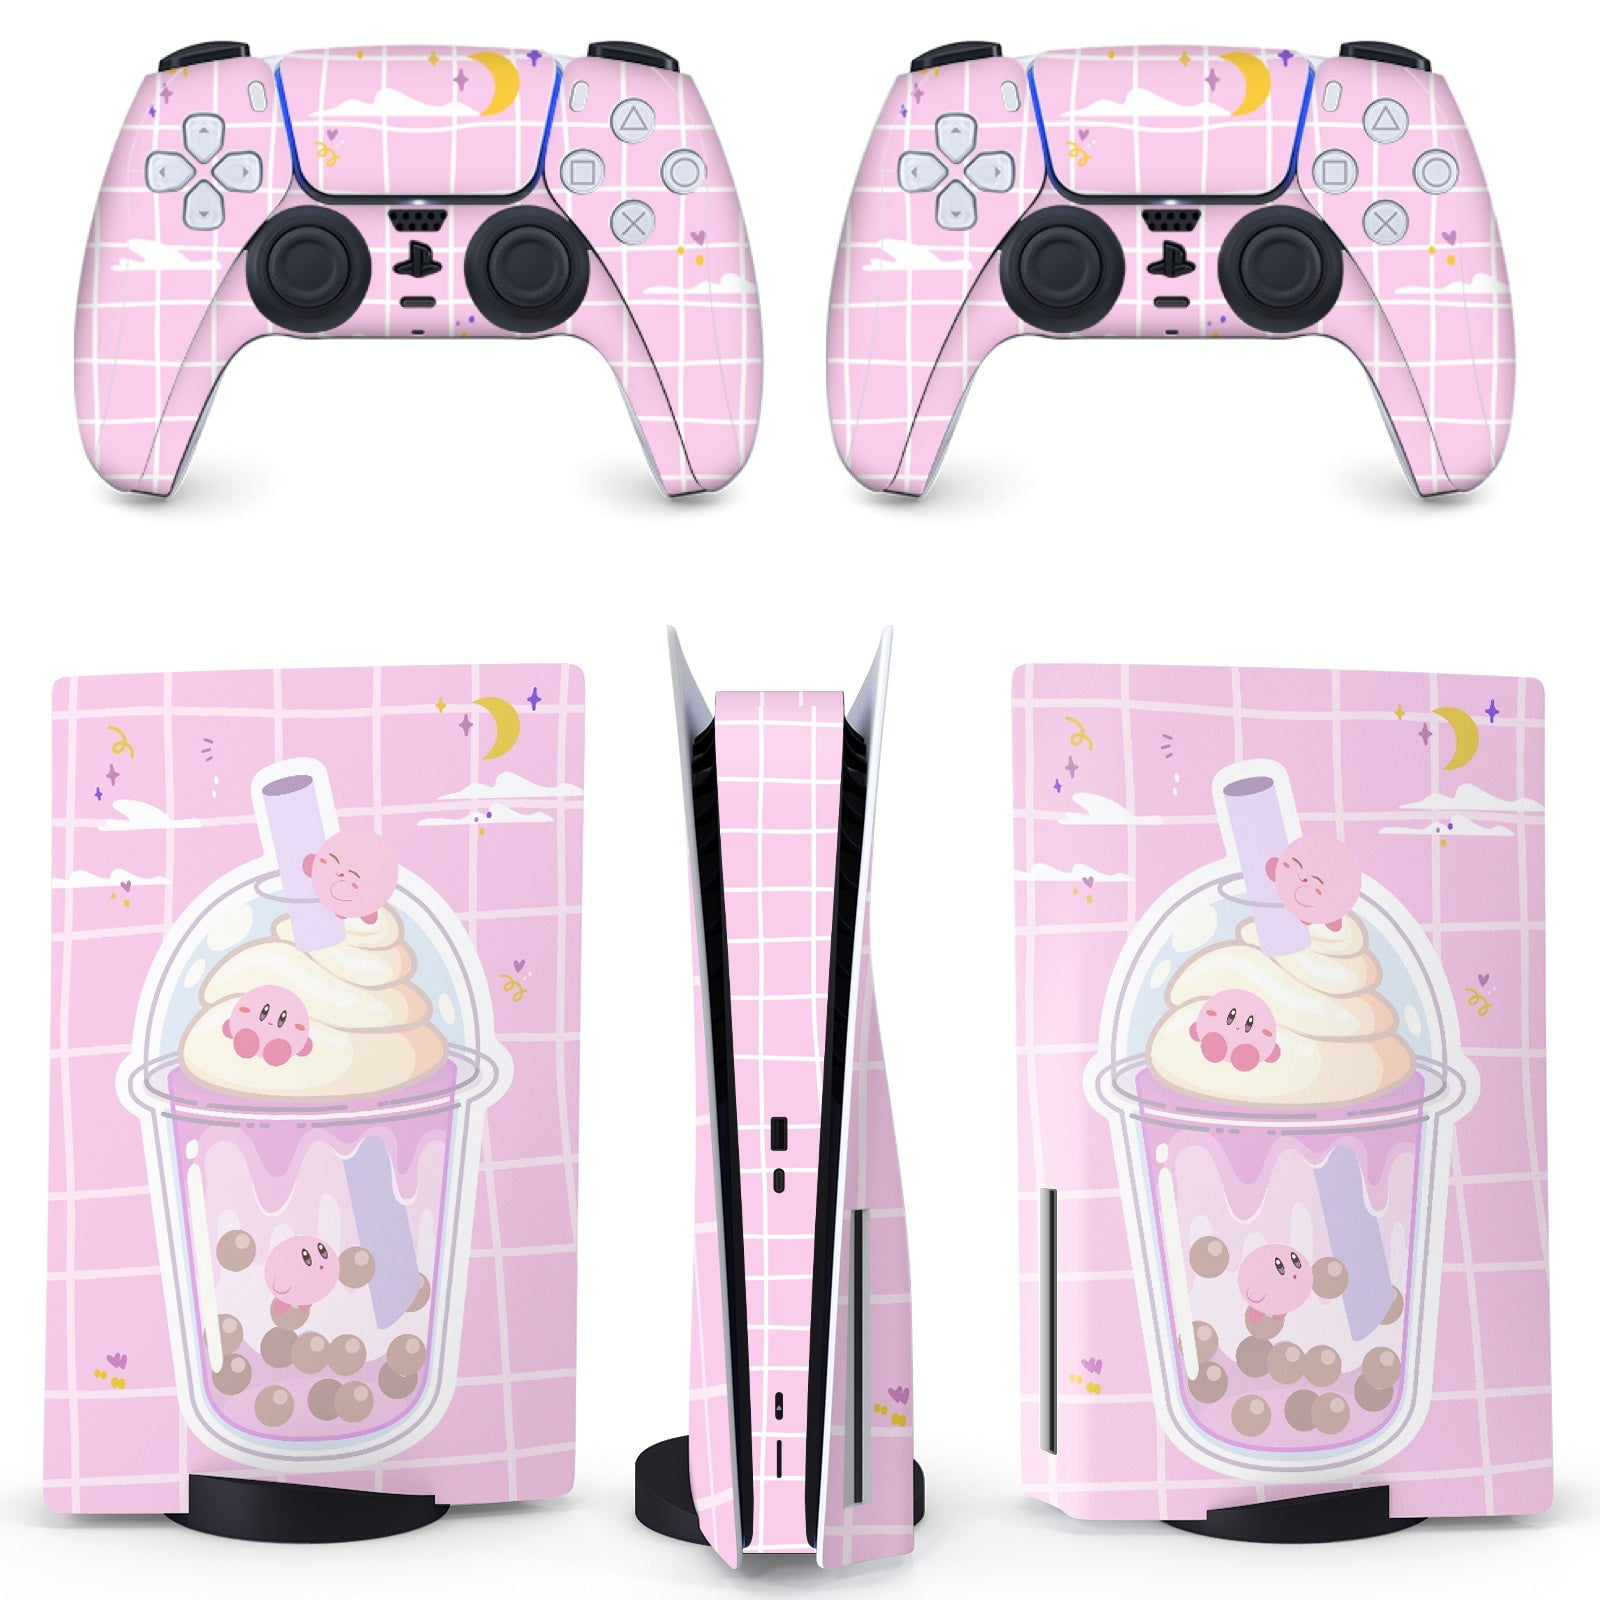 PS5 skin purple PlayStation 5 Skin kawaii sky star Console and Controller Vinyl Decal Sticker Full Coverage Decal Wrap Cover Sticker for ps5